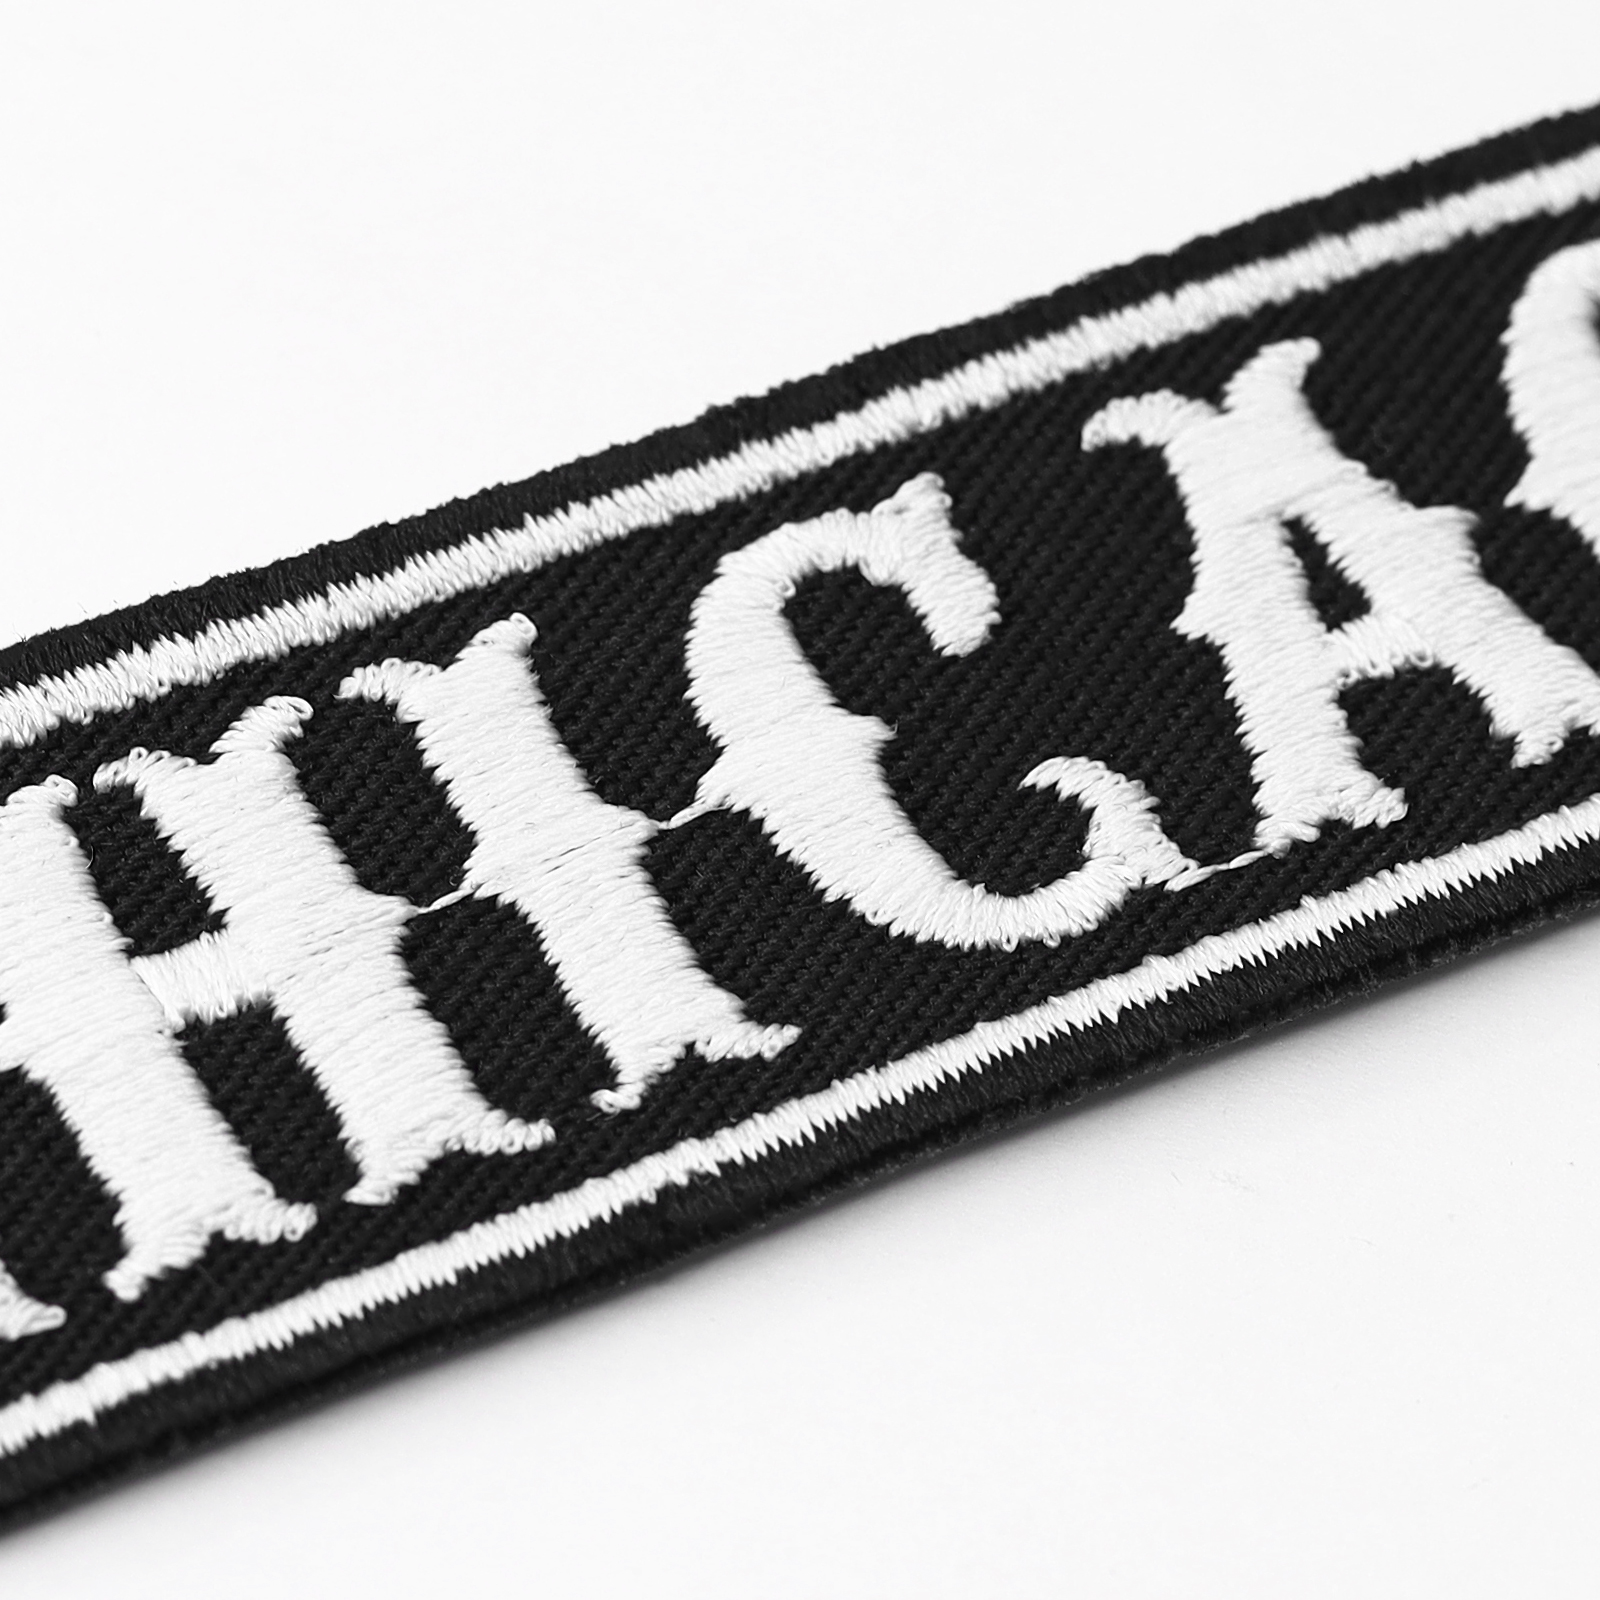 Chicago - Patch